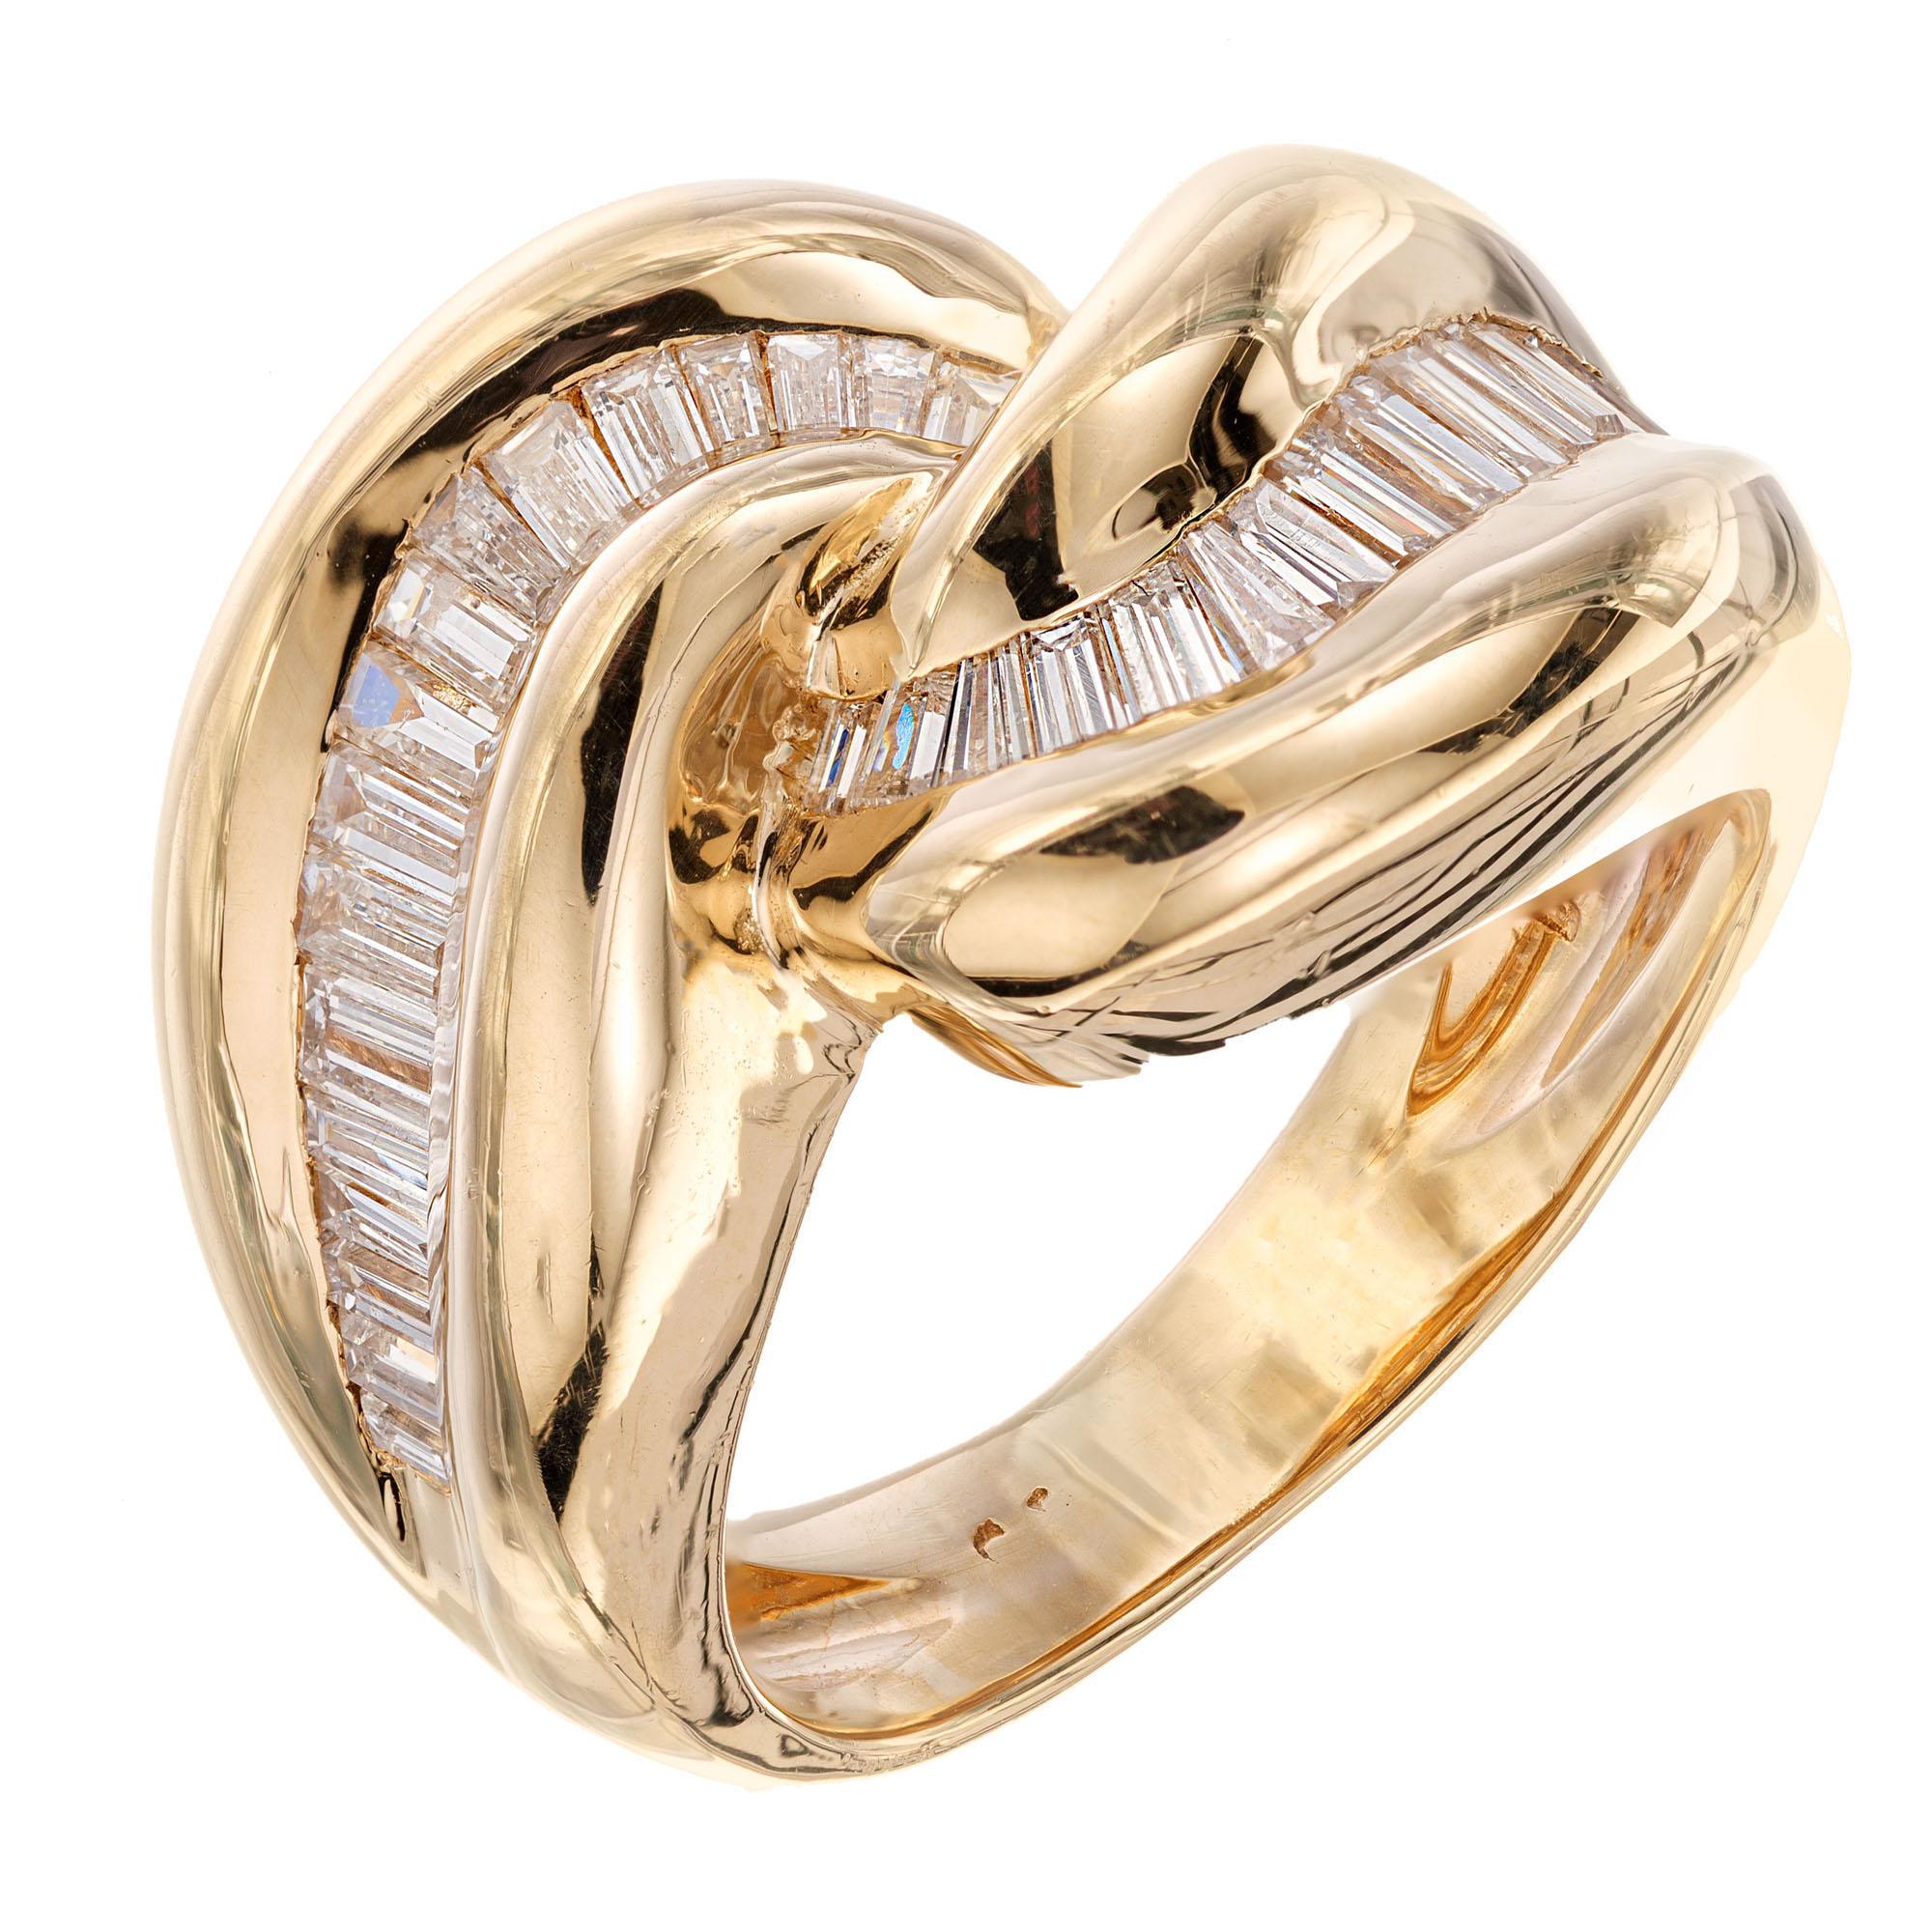 Diamond Swirl design 1960's cocktail ring. 36 Baguette diamonds in a 14k yellow gold setting. Signed KA, number 4761.

36 baguette diamonds, approx. total weight .70cts, F, VS – SI
Size 5.5 and sizable
14k yellow gold
Tested and stamped: